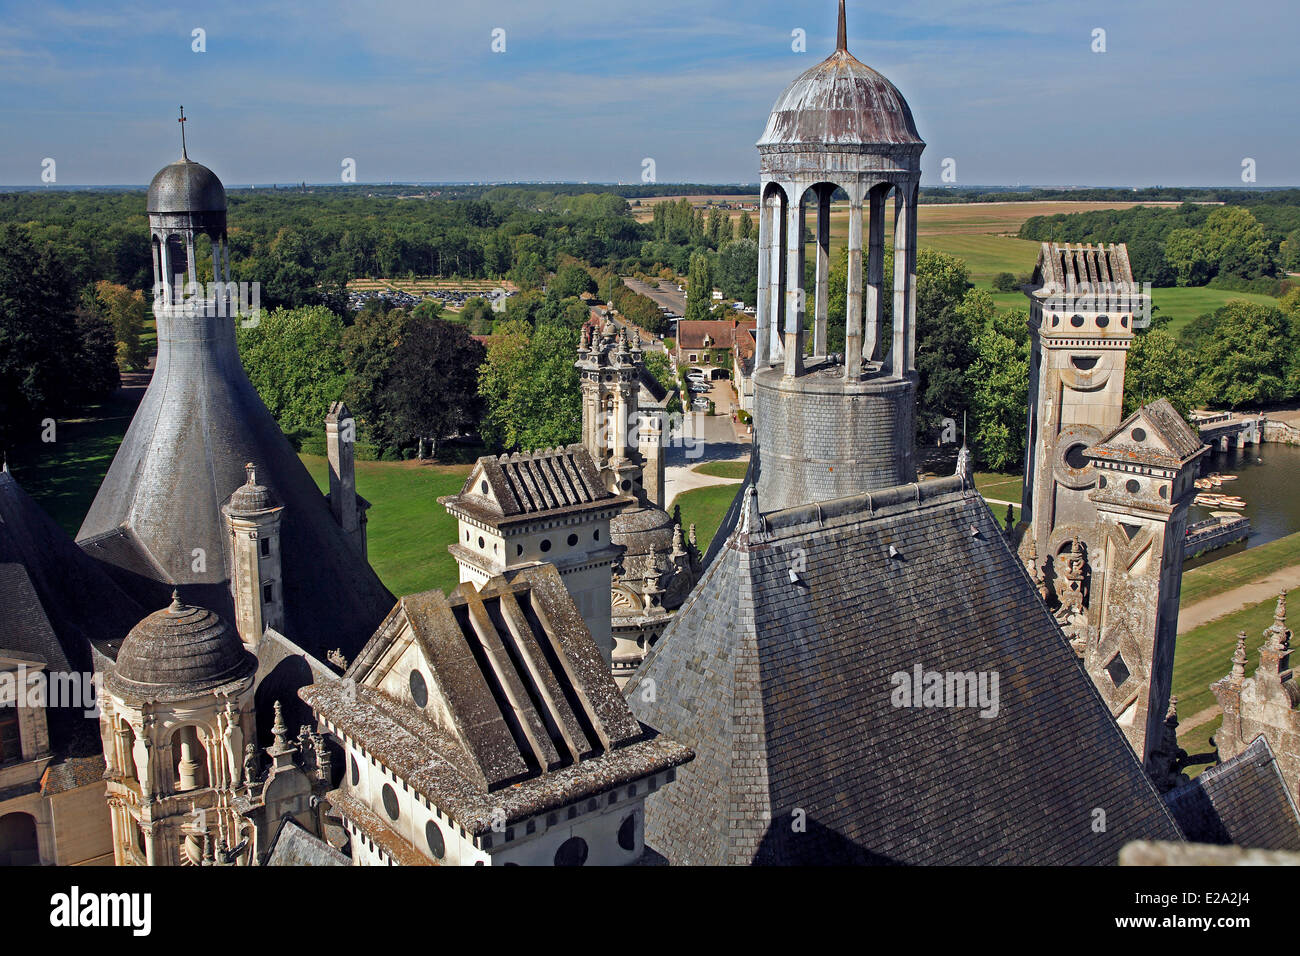 France, Loir et Cher, Loire Valley listed as World Heritage by UNESCO, Chateau de Chambord, the castle roofs adorned with many Stock Photo